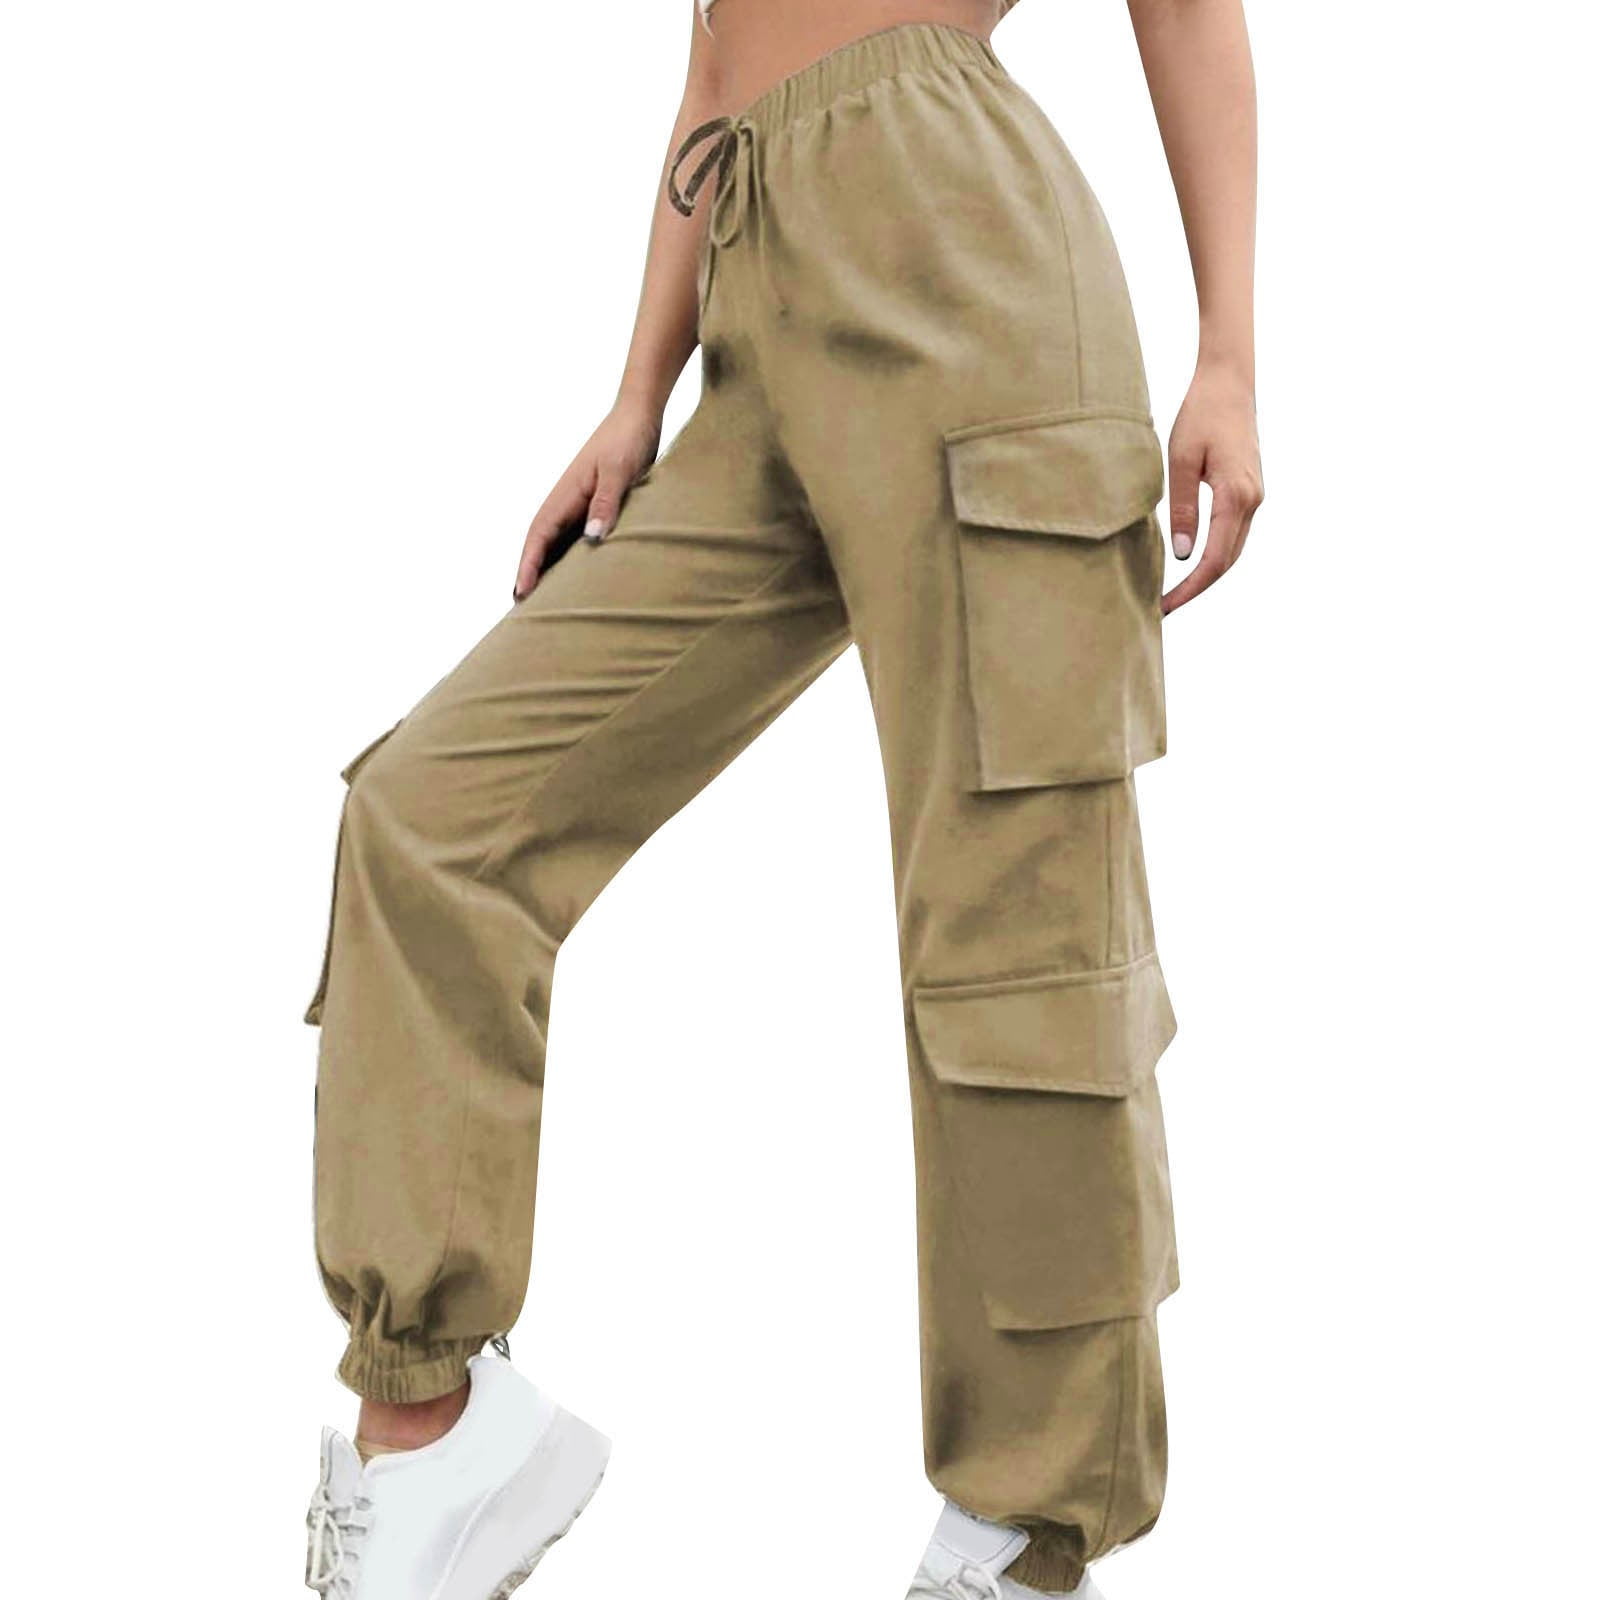 adviicd Womens Business Casual Pants For Work Cargo Pants Women